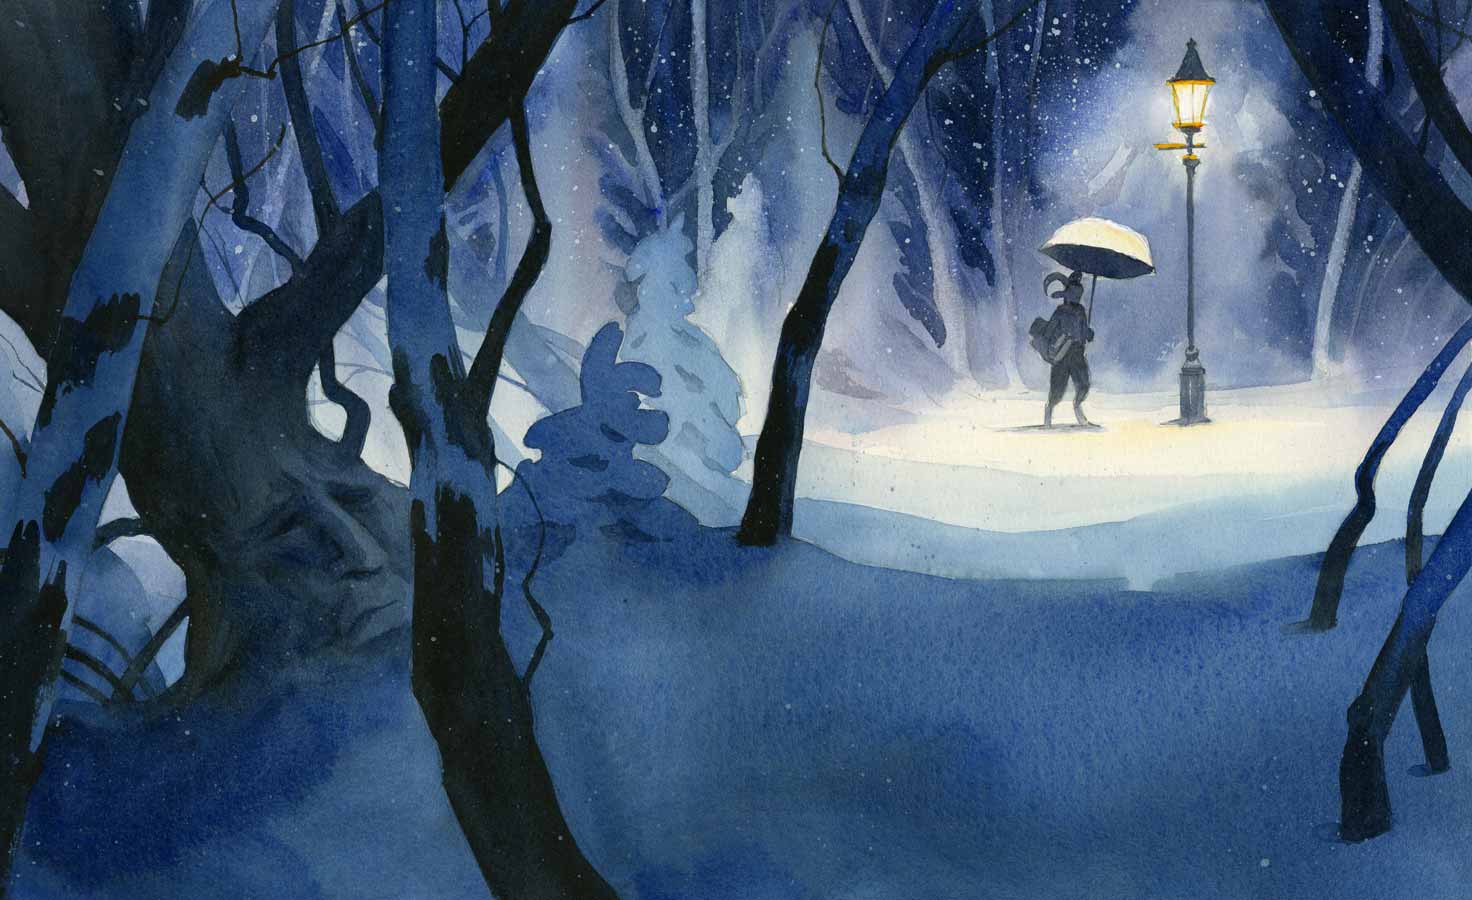 Watercolor illustration of Narnia from 'Finding Narnia' of a snowy forest with a faun standing under an umbrella next to a lamp-post.